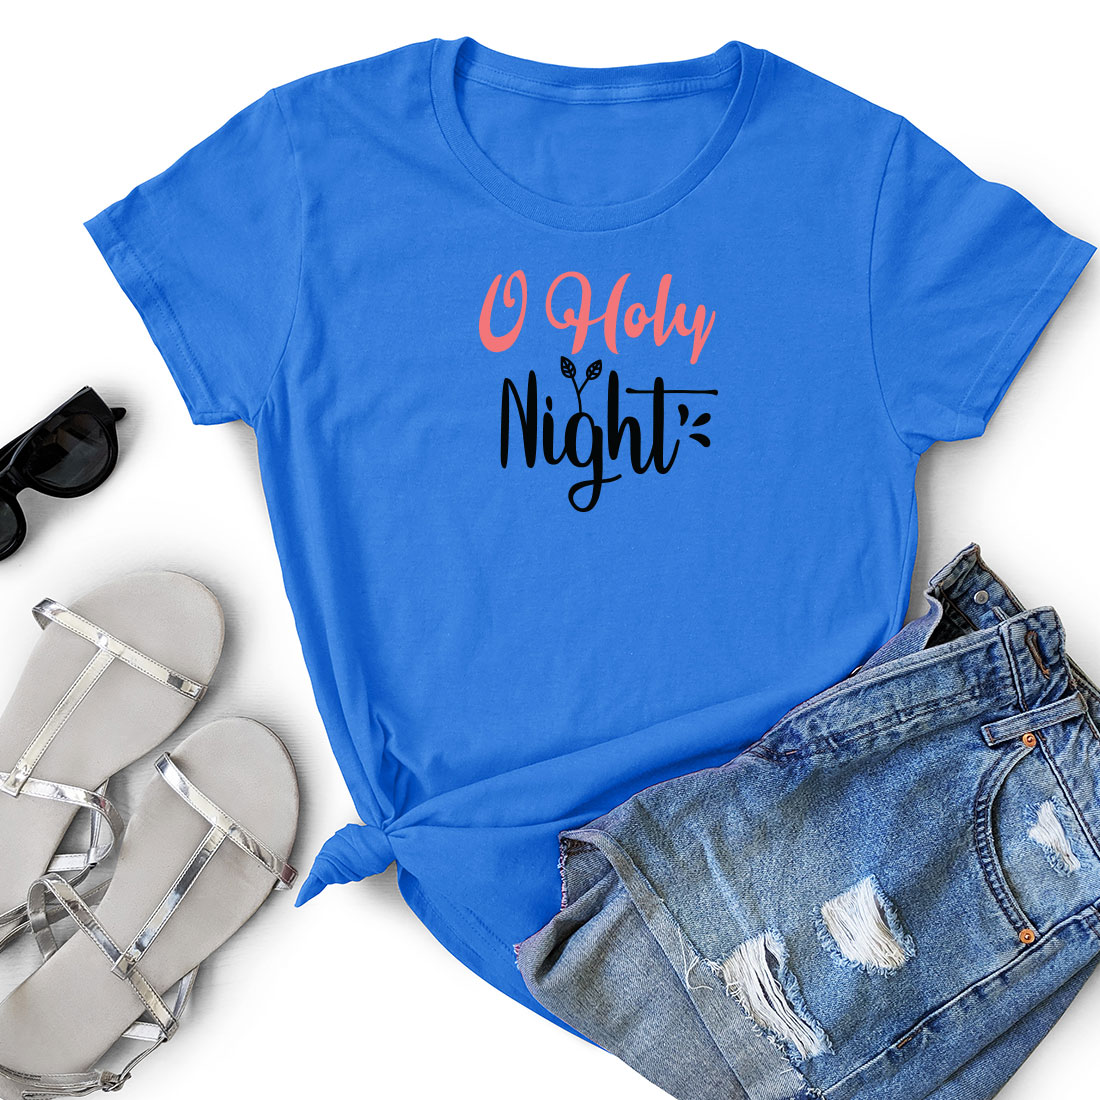 T - shirt that says o holy night next to a pair of shorts.